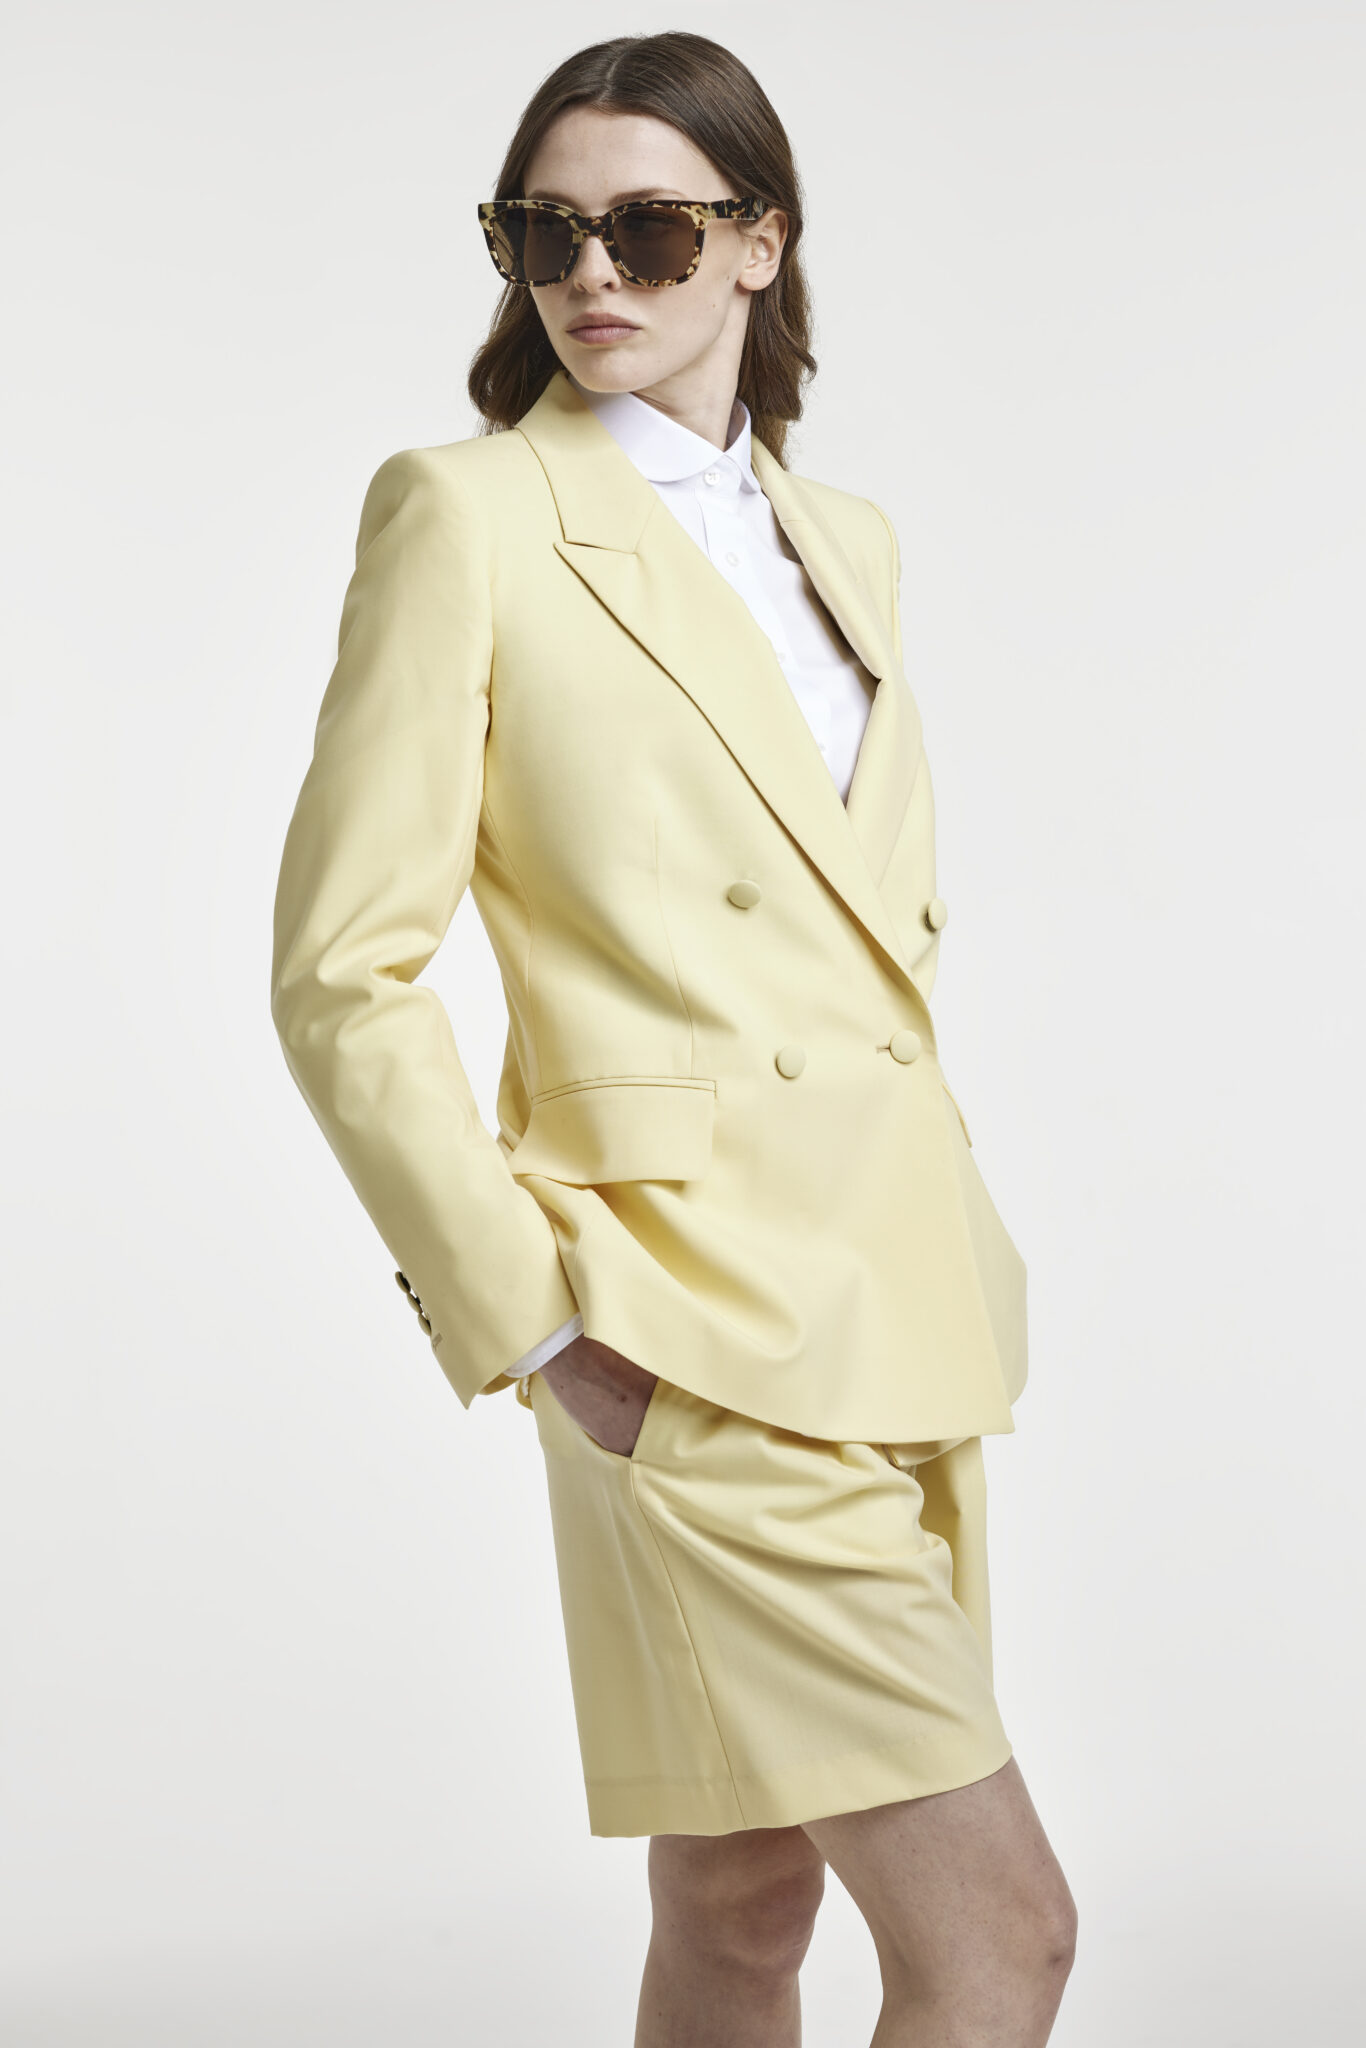 MR47-YELLMUSPAS-2XL Yellow Mustard Formal Men suit - Formal Men Suits  Malaysia - Ready Made for Rental and Purchase